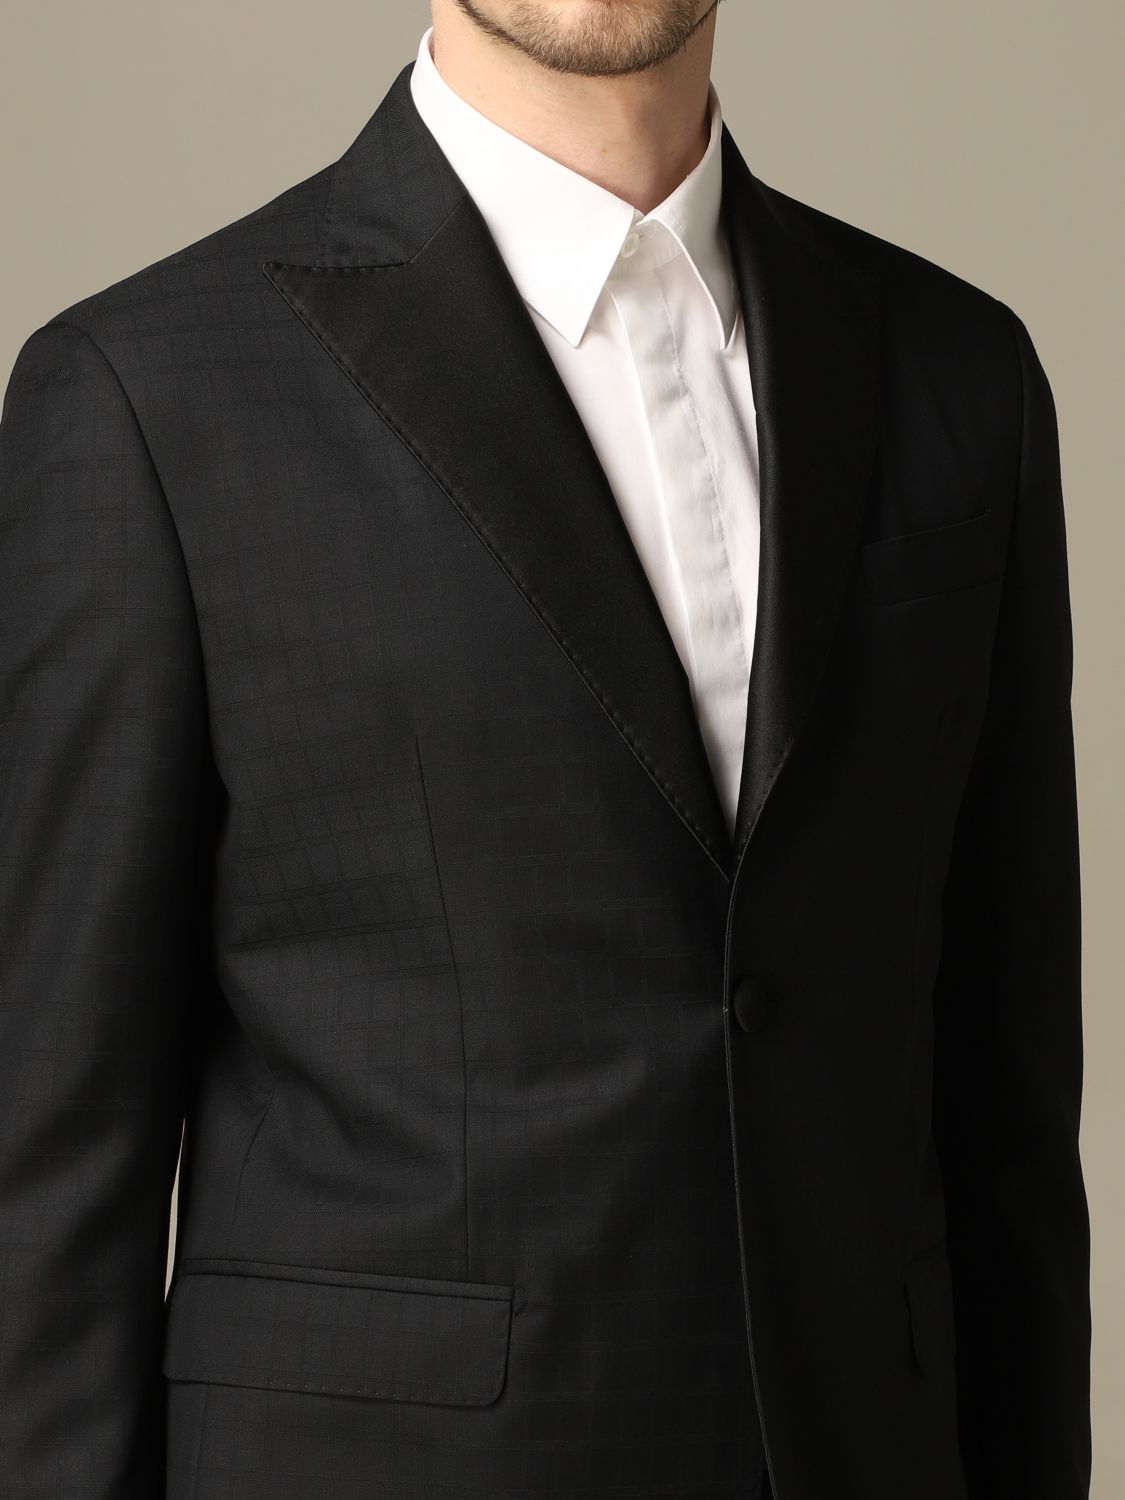 Alessandro Dell'acqua Outlet: single breasted suit - Black | Suit ...